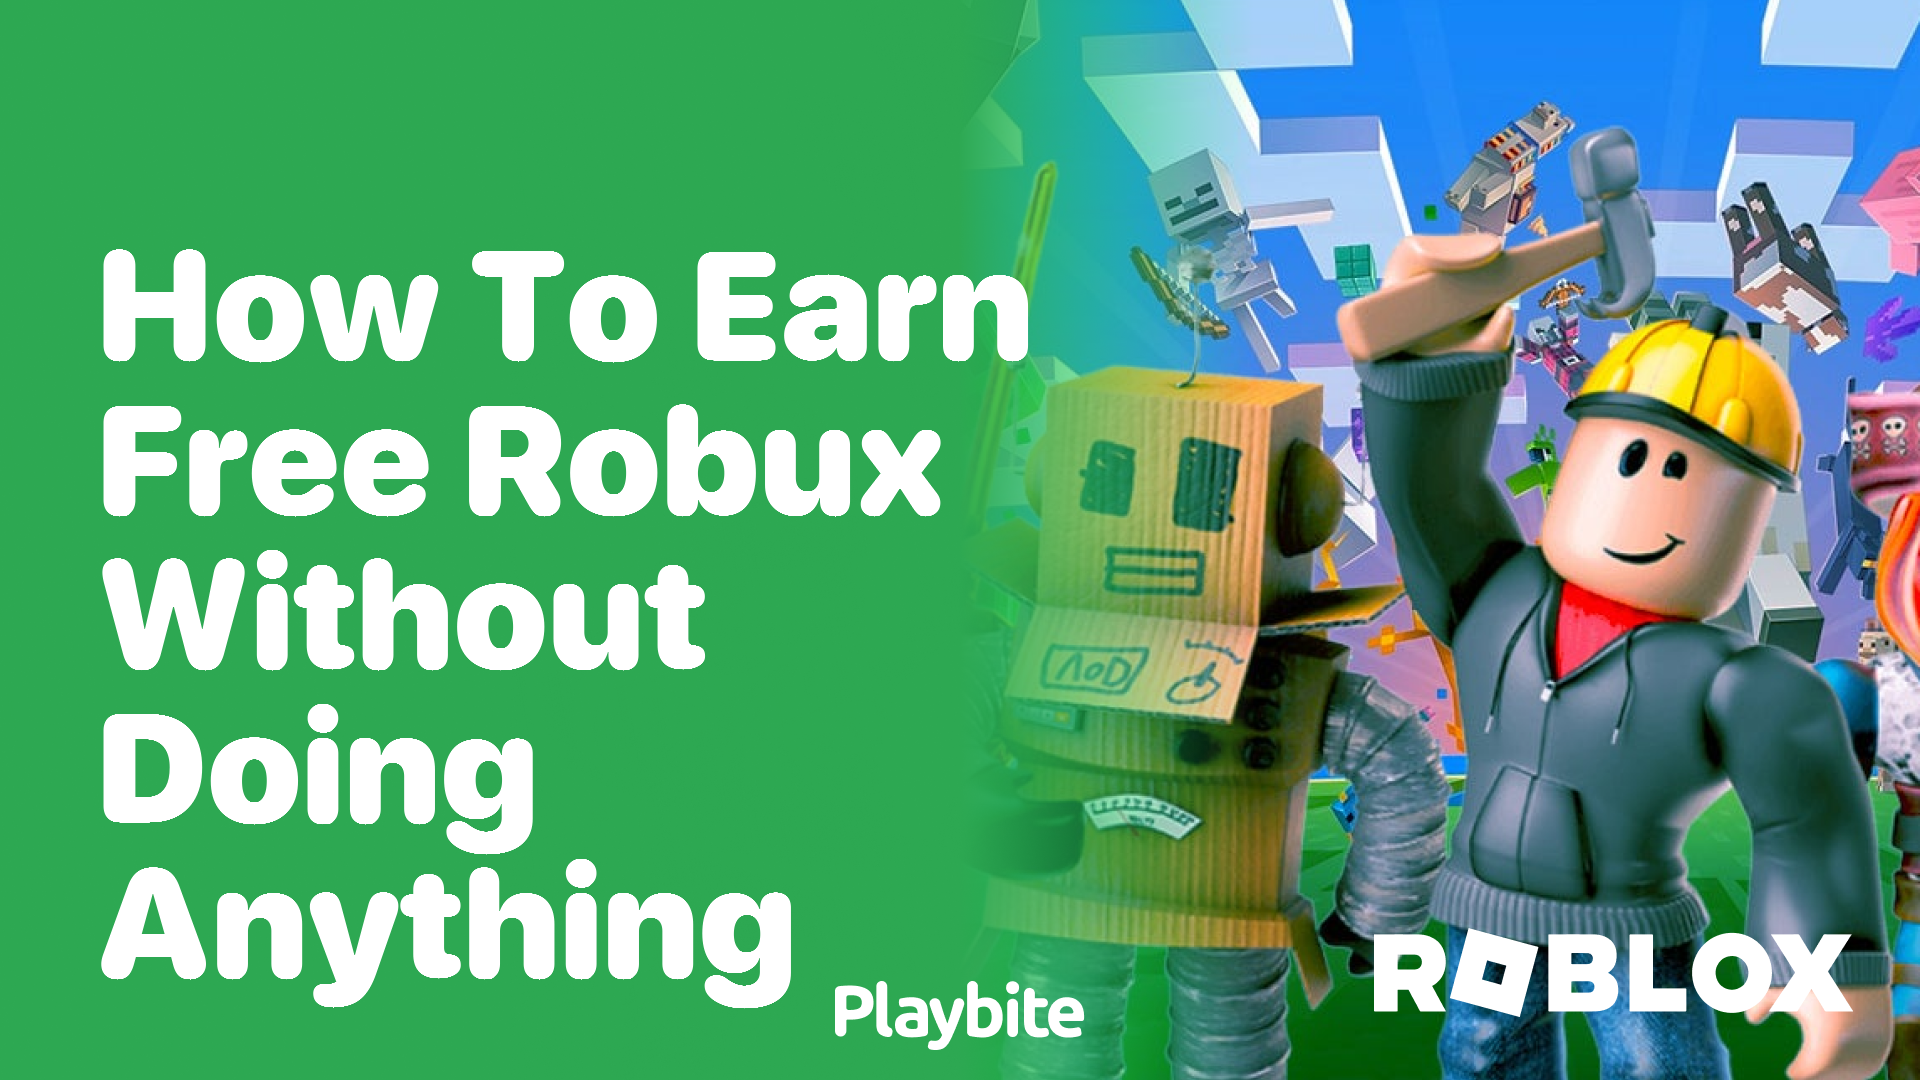 How to Earn Free Robux Without Doing Anything